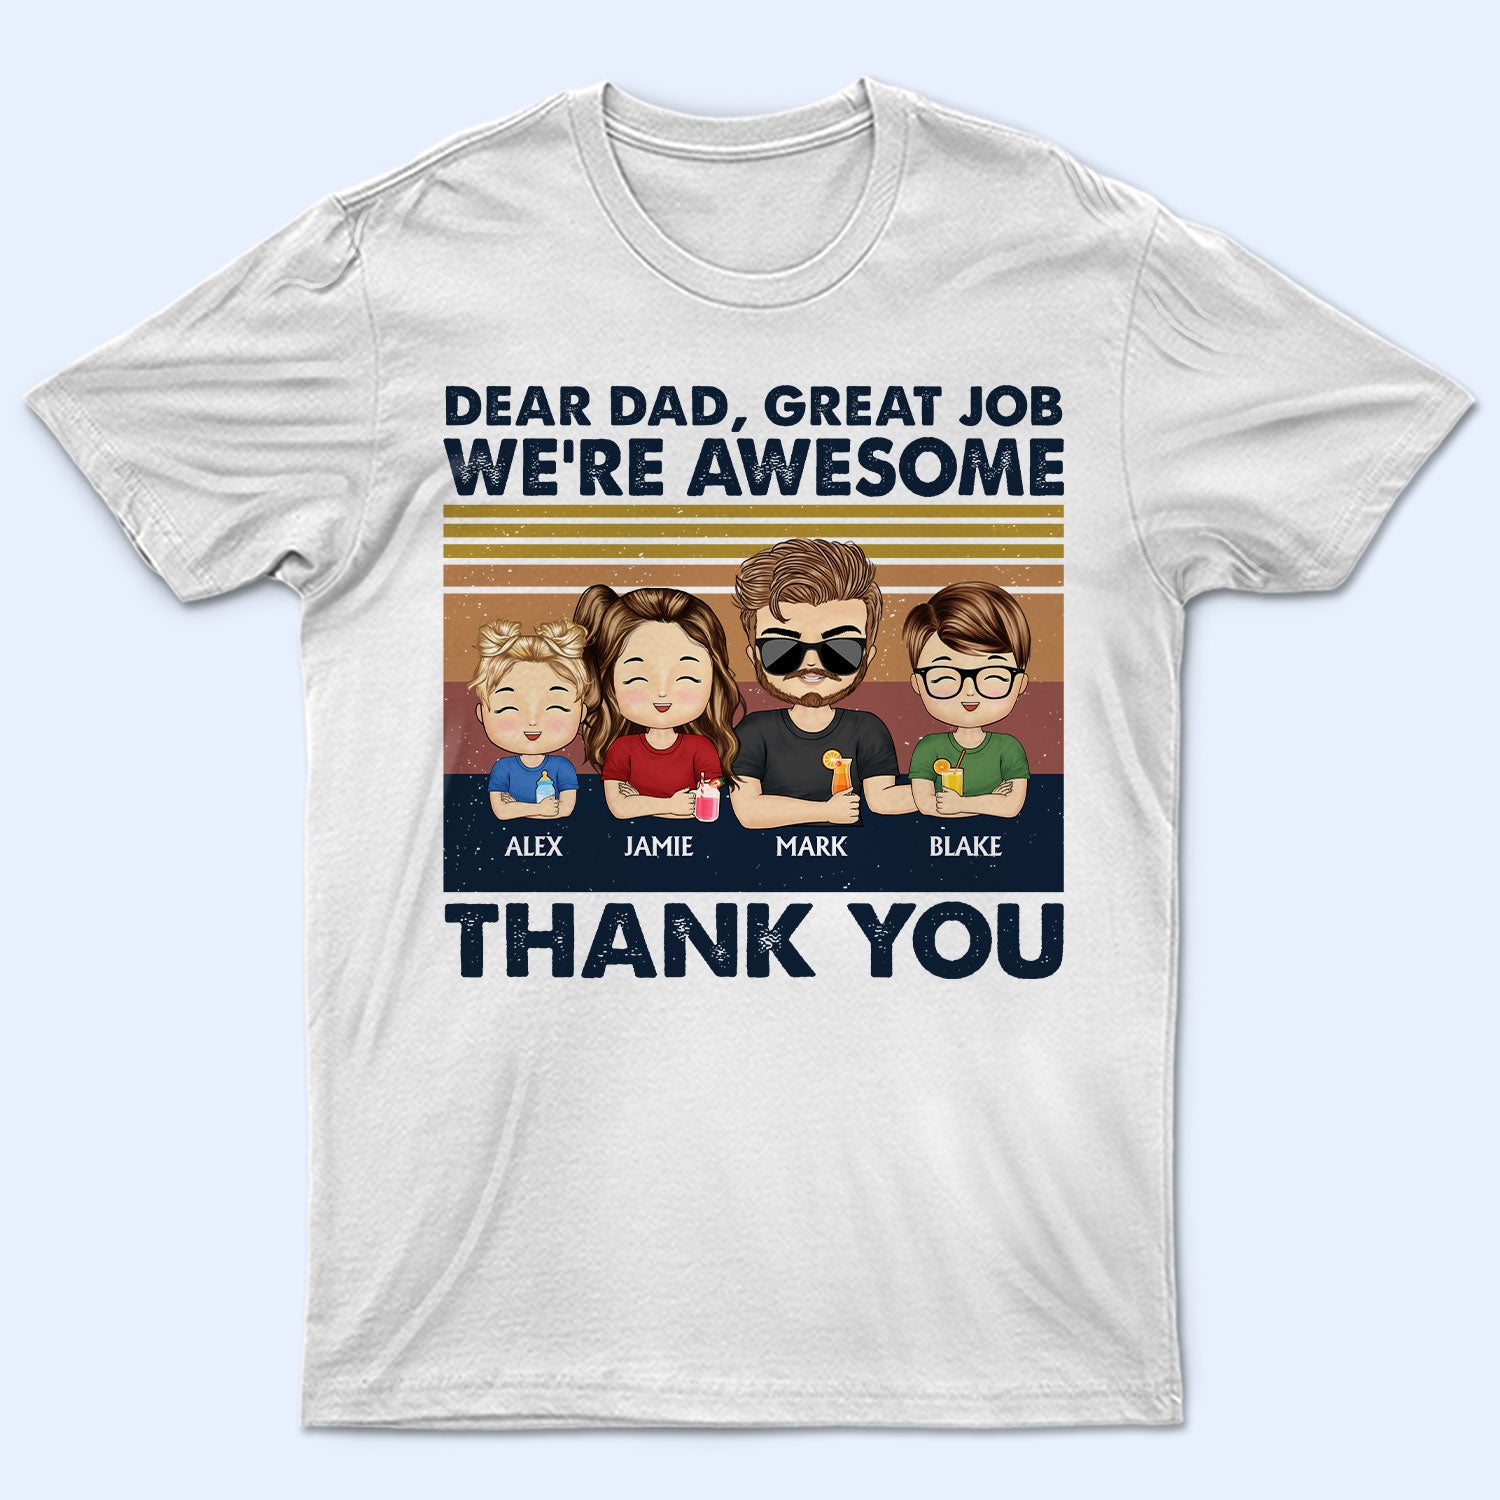 Dear Dad Great Job I'm Awesome Thank You Young - Birthday, Loving Gift For Dad, Father, Grandpa, Grandfather - Personalized Custom T Shirt